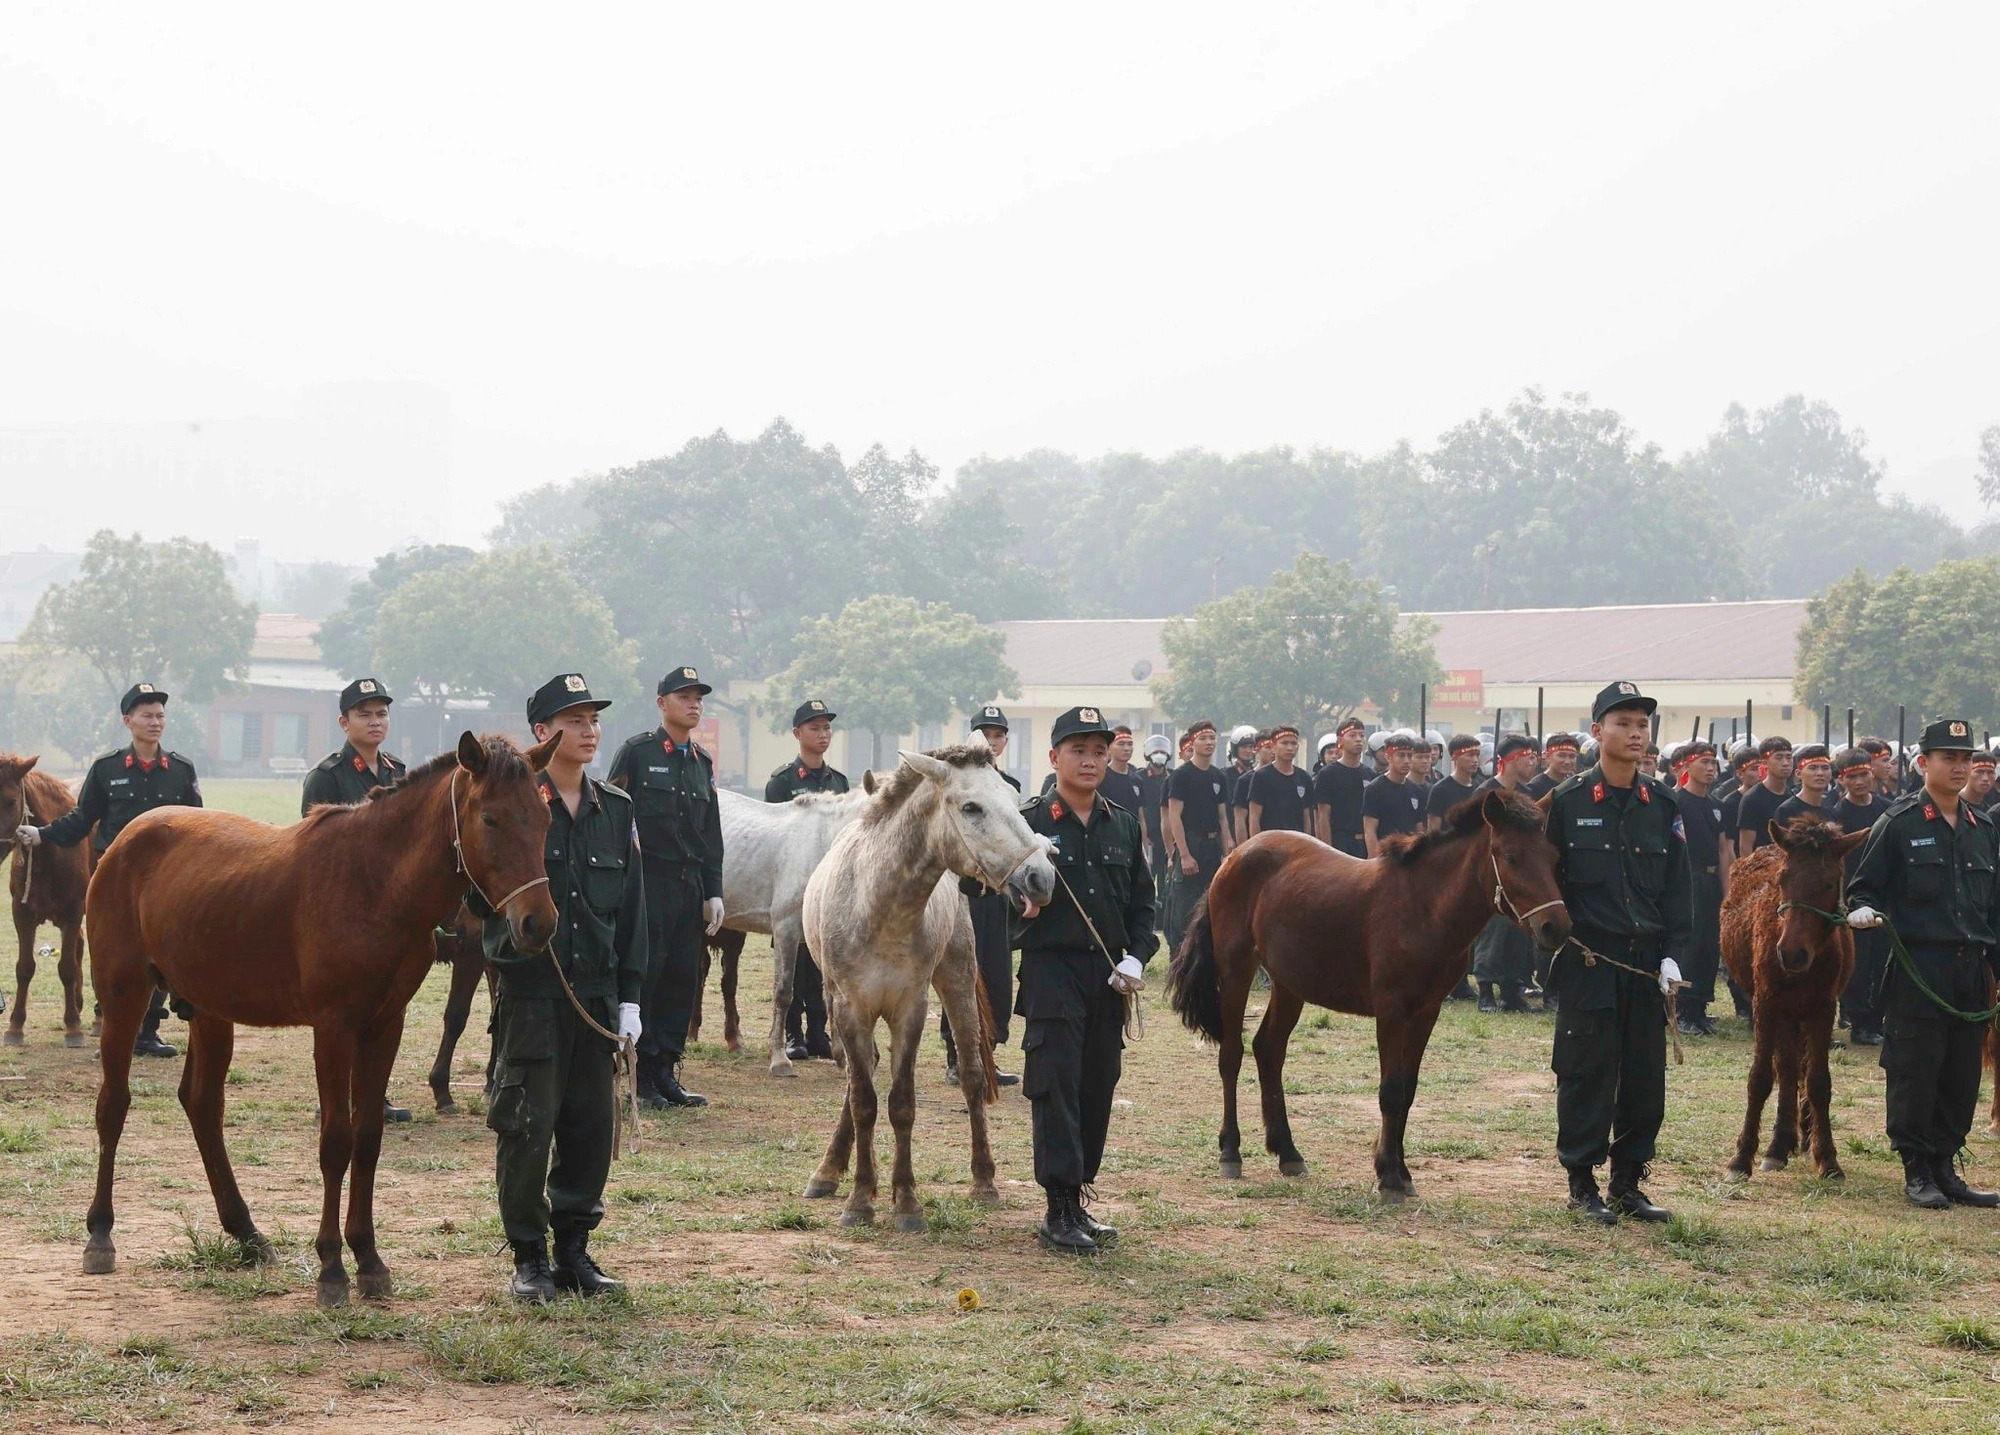 The Vietnamese mobile mounted police force use a herd of horses presented by the Mongolian government and people. Photo: Vietnam News Agency